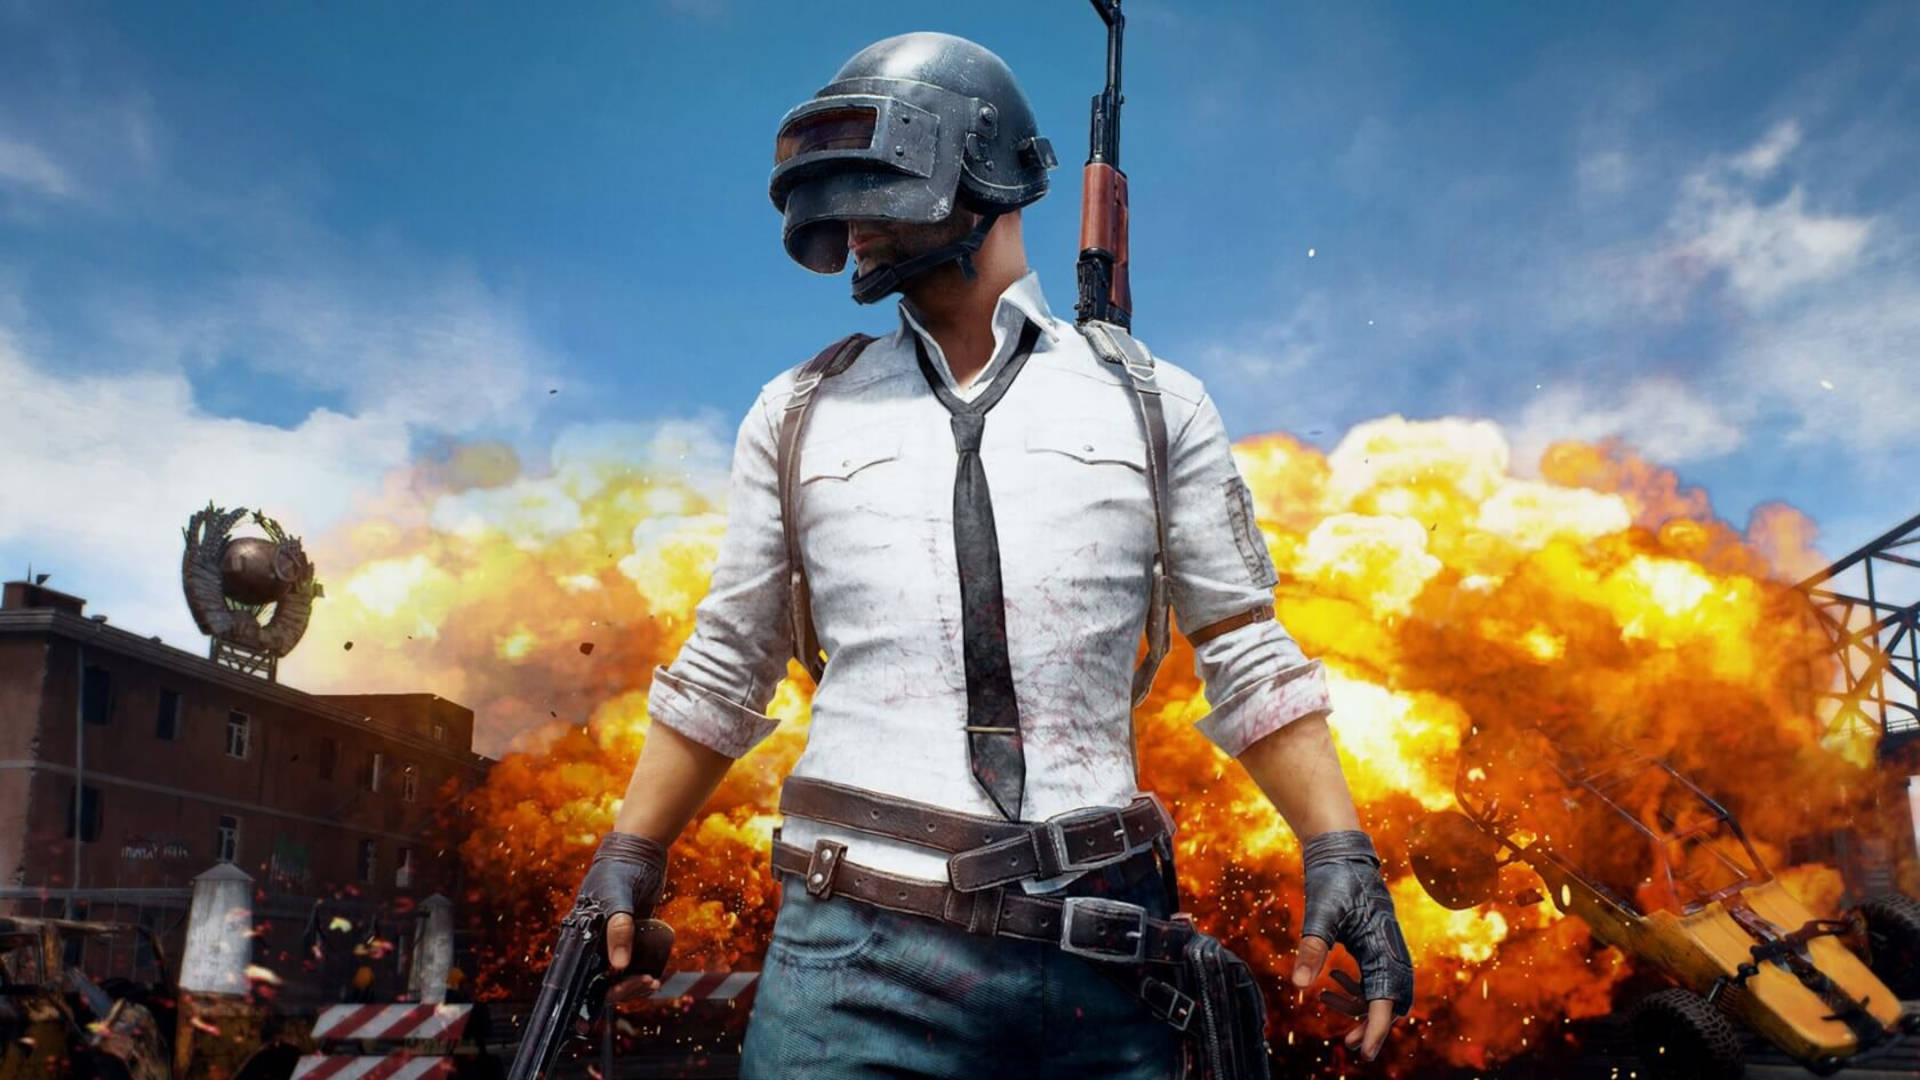 How to install PUBG Mobile APK in GameLoop emulator?